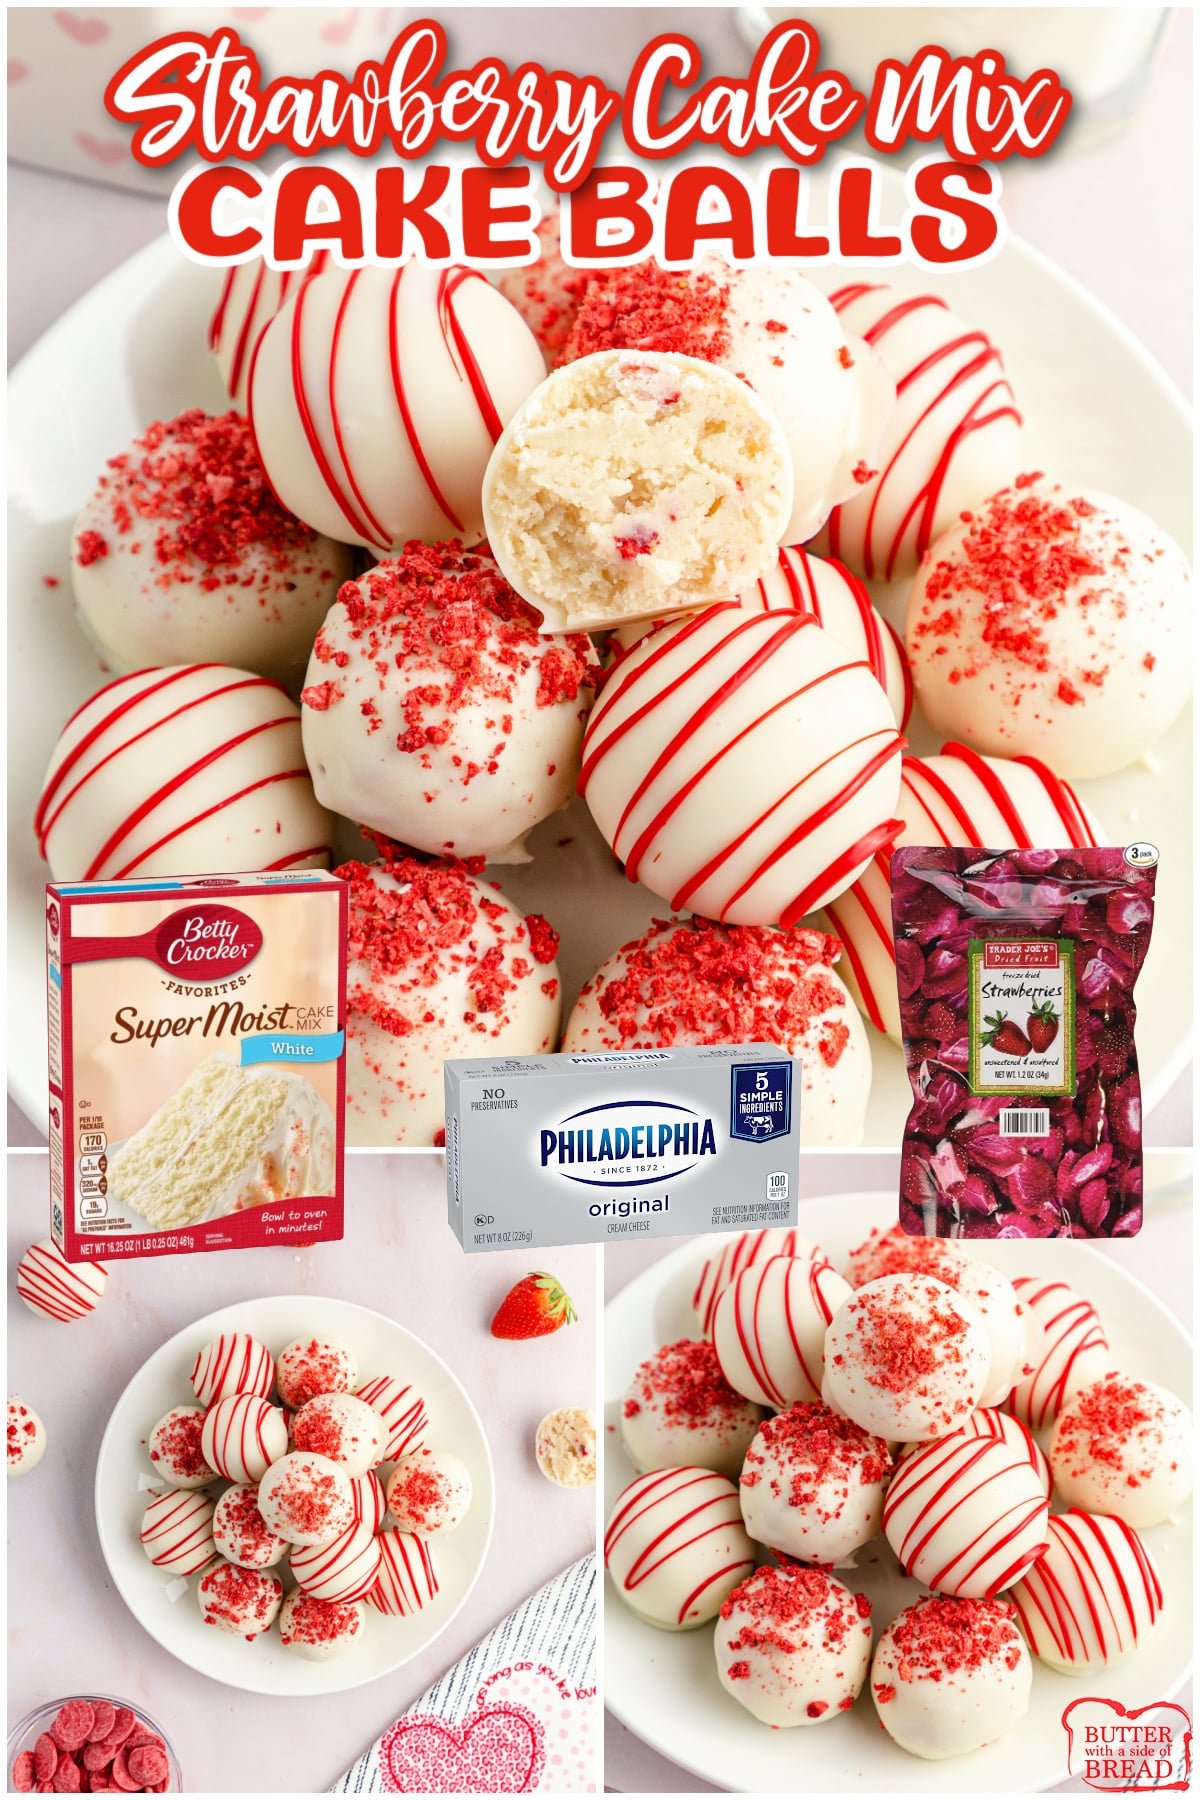 Strawberry Cake Mix Cake Balls made with a vanilla cake mix, cream cheese and freeze dried strawberries. Dip the cake balls in melted chocolate and add some sprinkles. Simple no bake dessert that is perfect for parties and holidays!